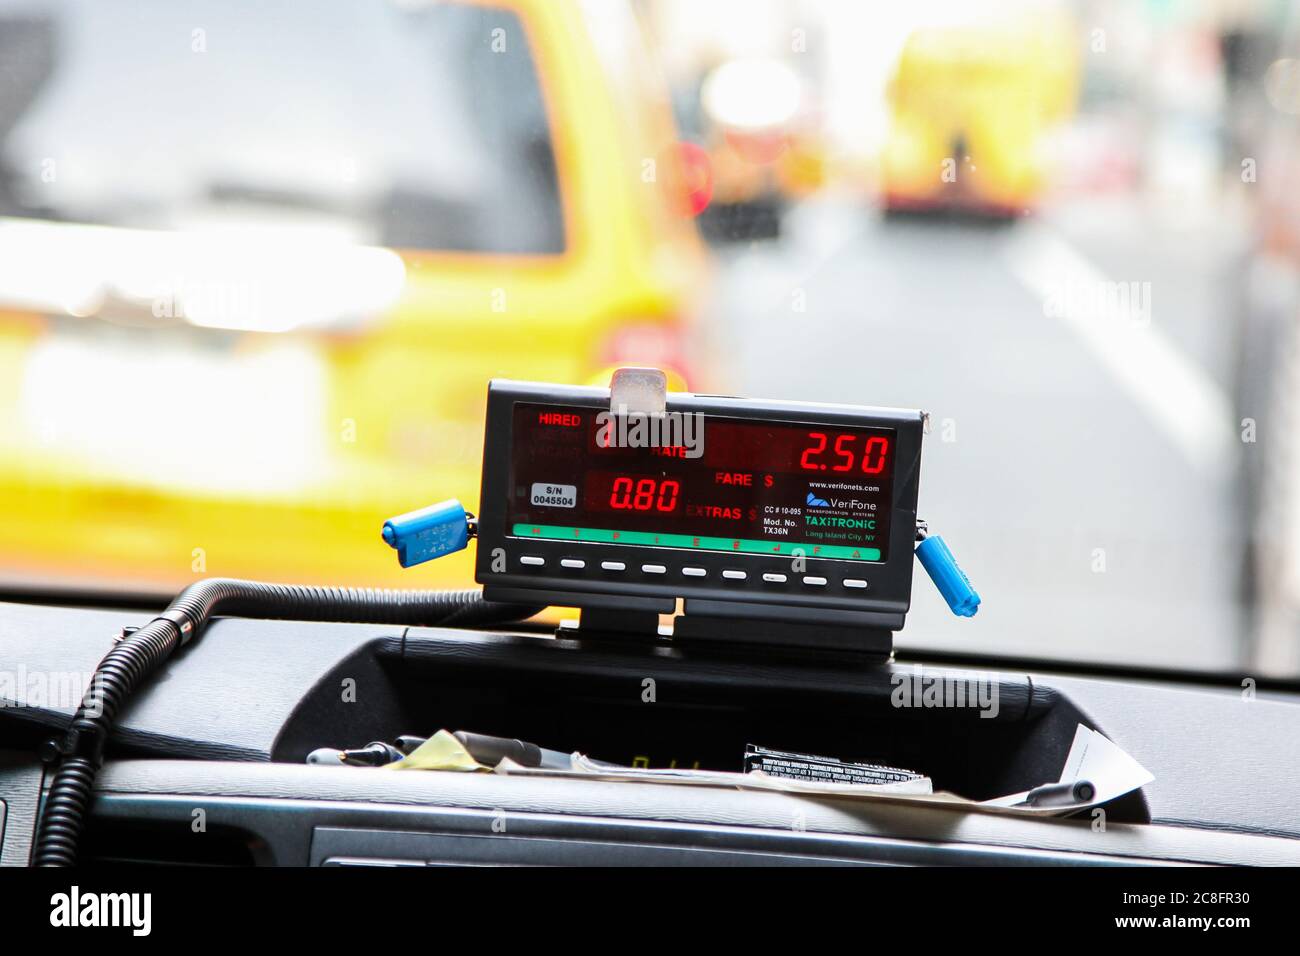 Taxi Meter High Resolution Stock Photography and Images - Alamy